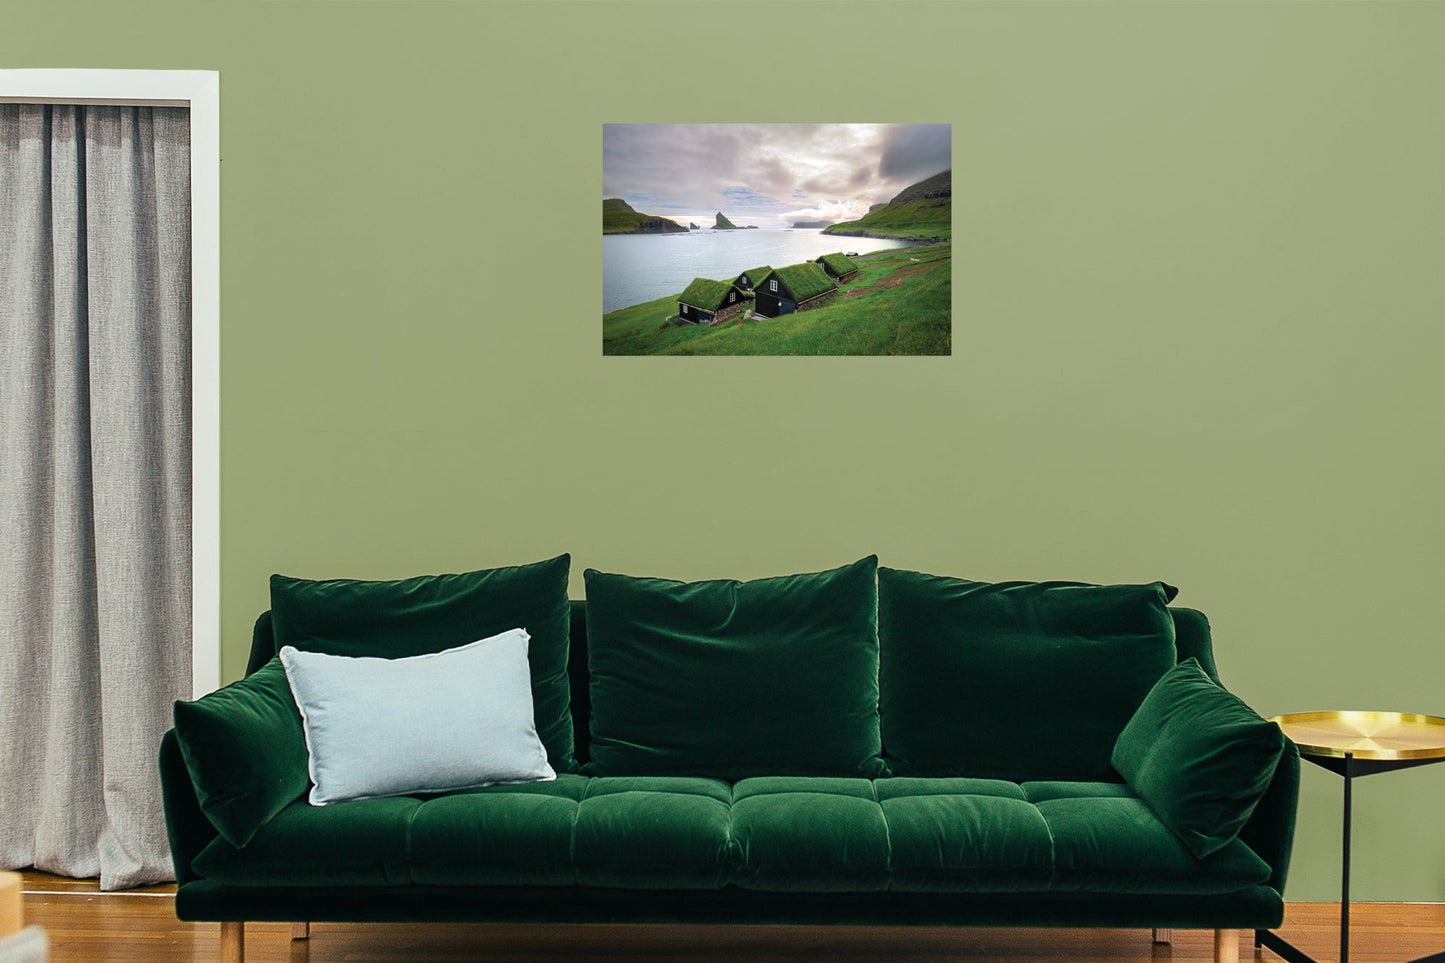 Popular Landmarks: Faroe Islands Realistic Poster - Removable Adhesive Decal